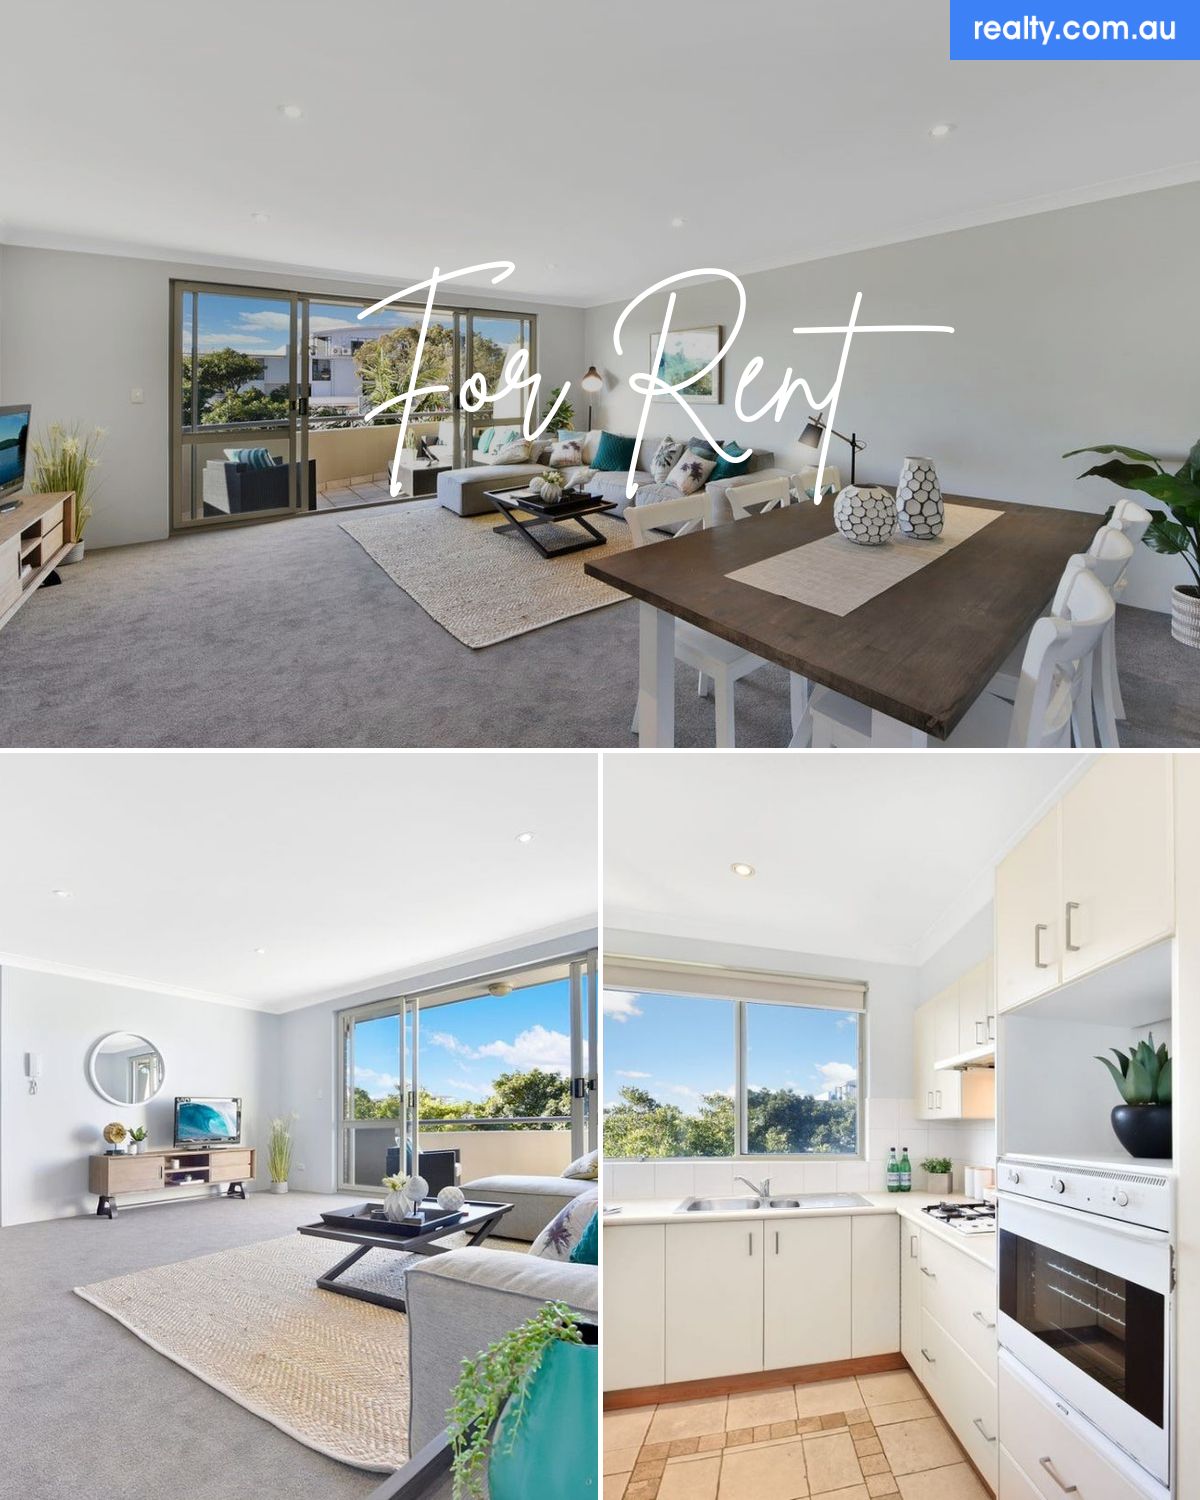 11/10 Lagoon St, Narrabeen, NSW 2101 | Realty.com.au